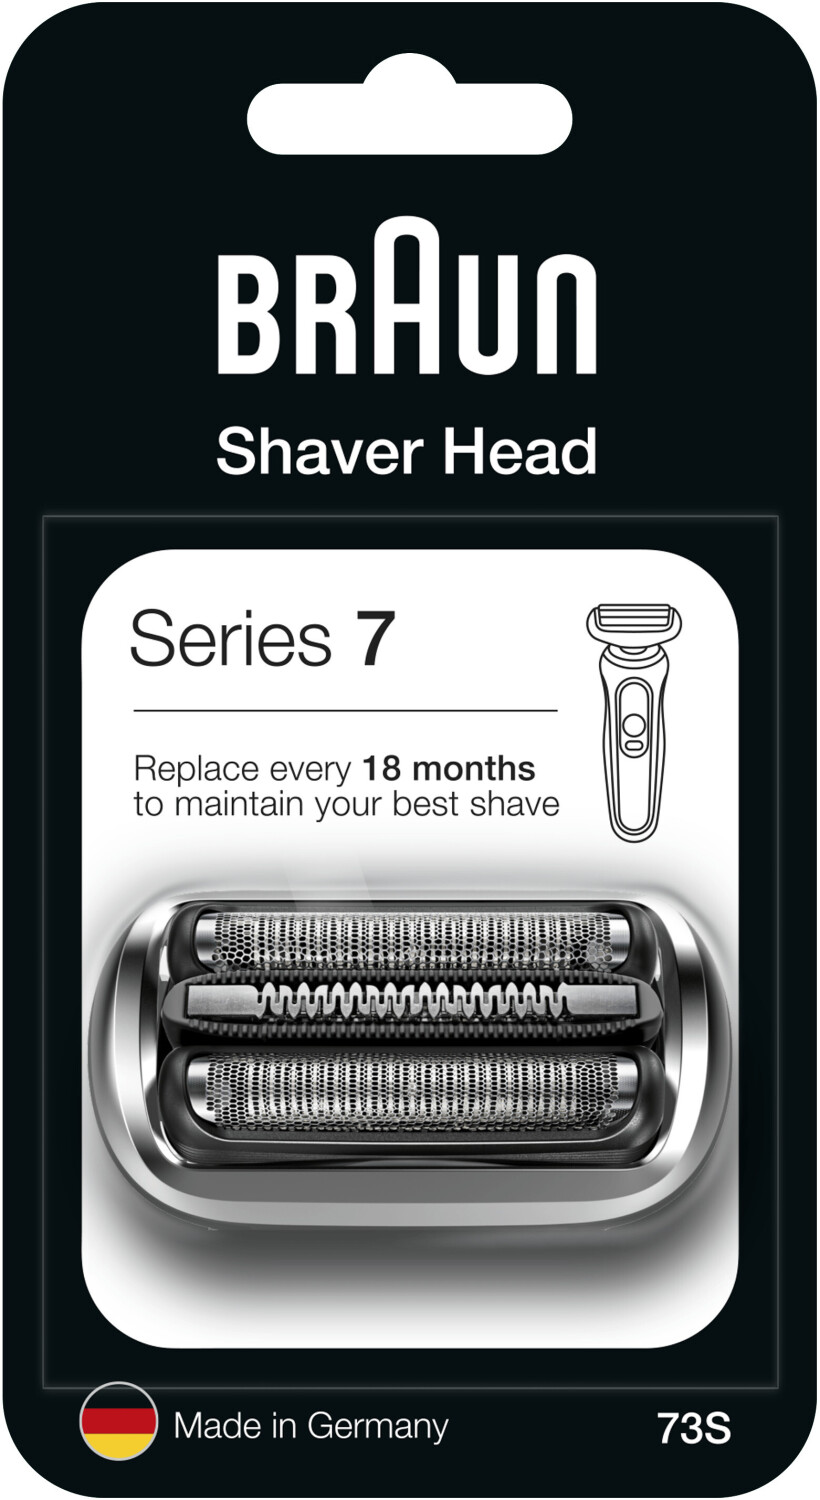 Buy Braun Series 7 Shaver Head 73S from £19.99 (Today) – Best Deals on